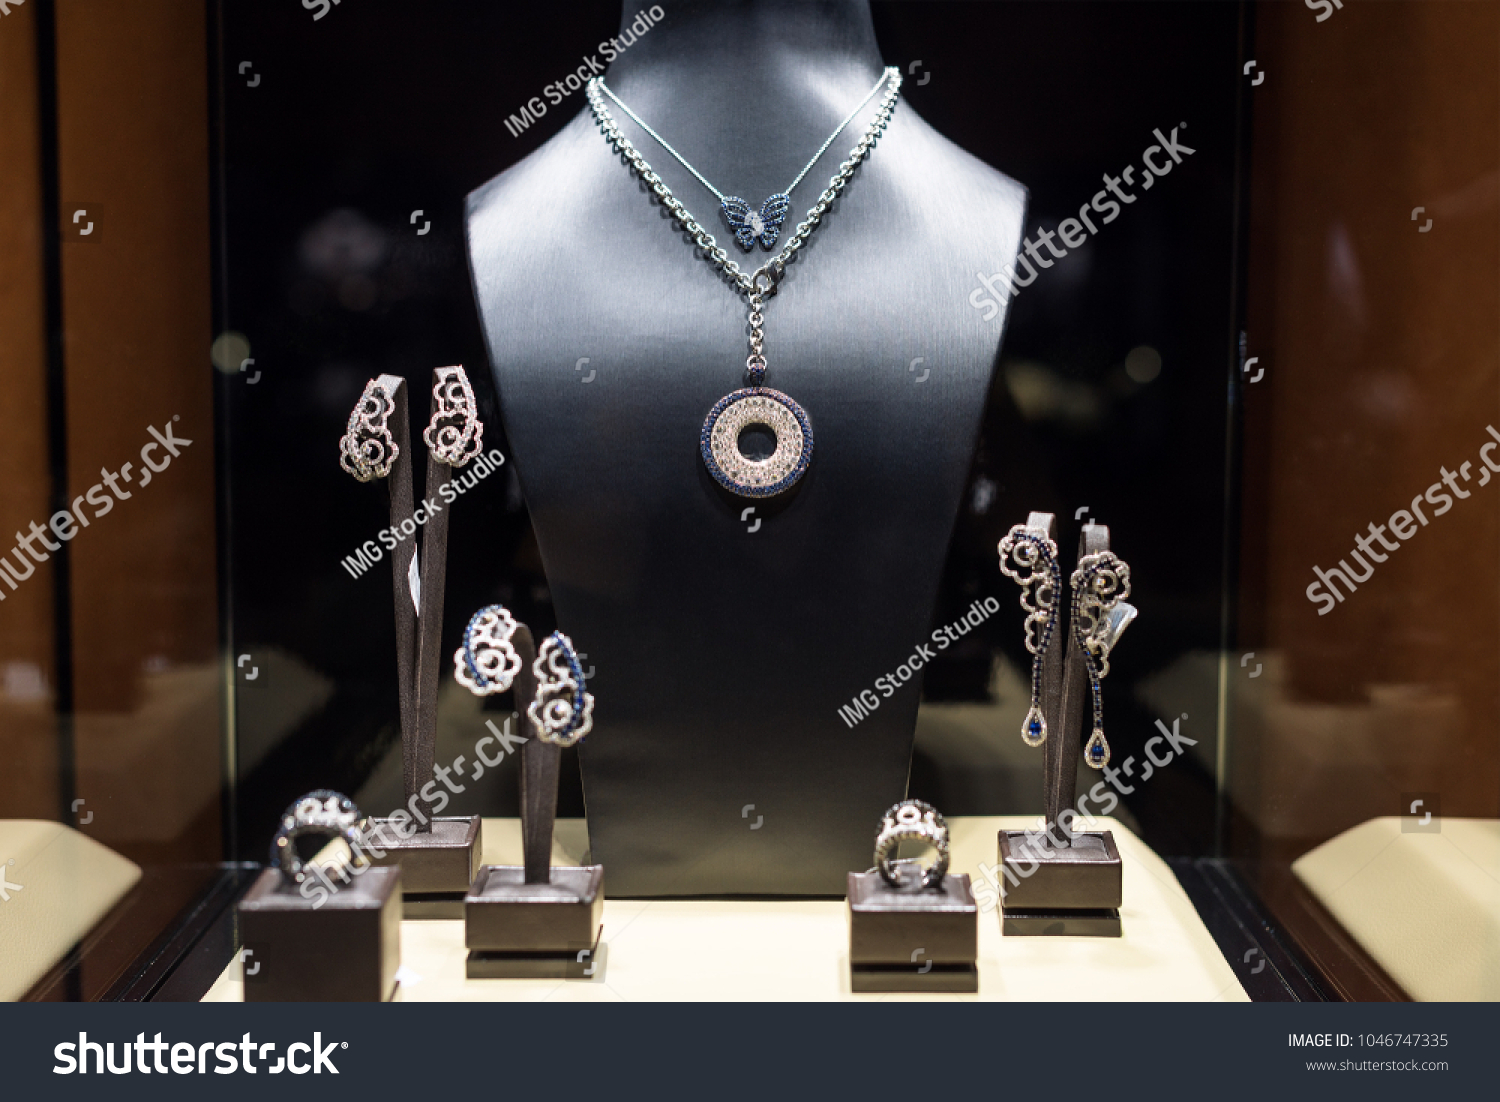 Variety of jewelry in store window. Rings, bracelets, earrings and necklaces on stands for sale. #1046747335